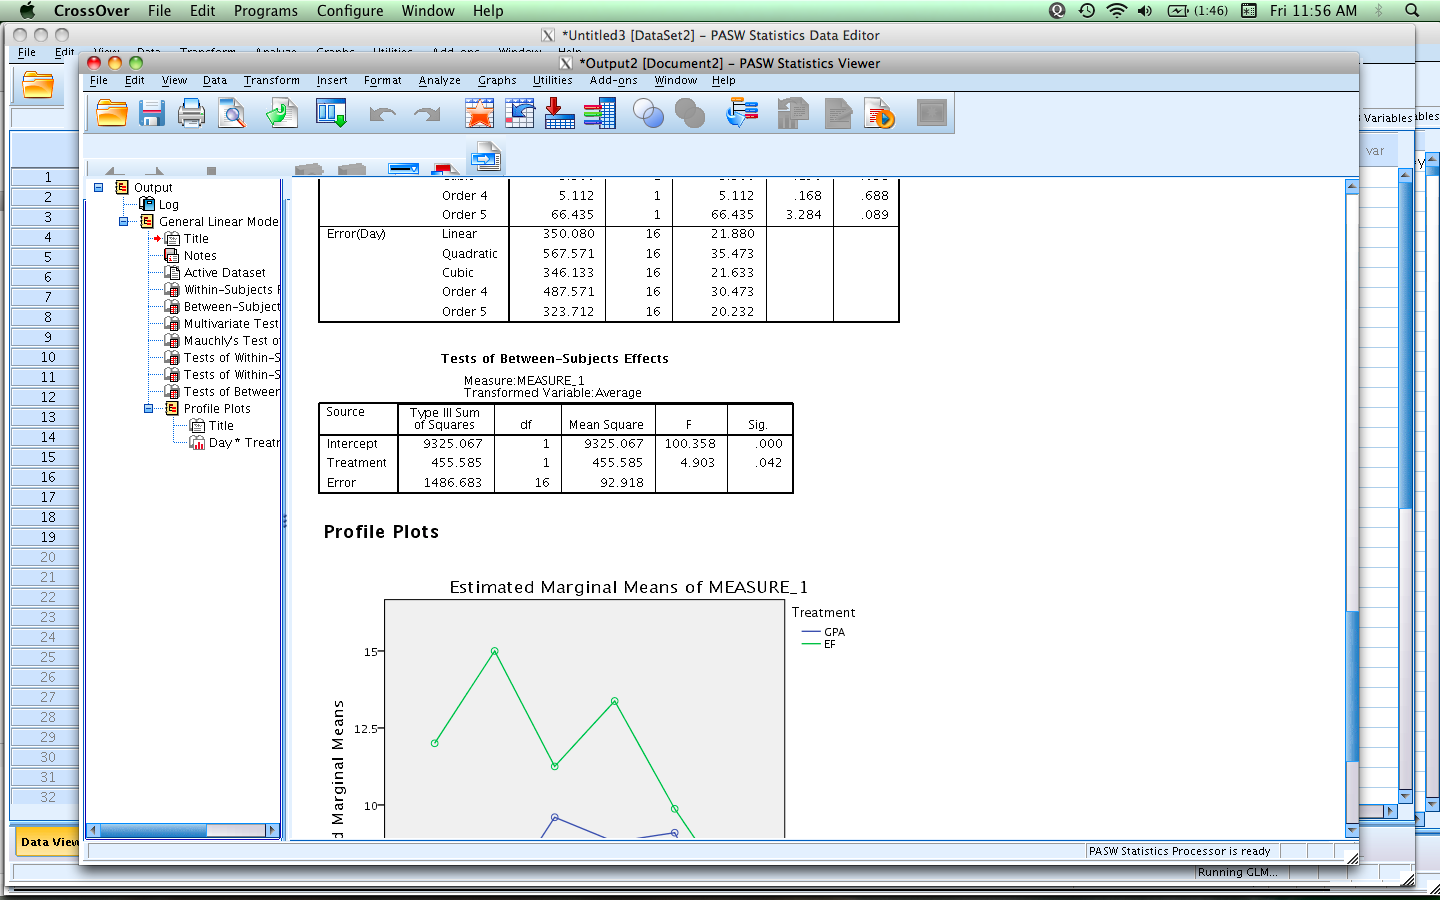 spss free download for windows 10 full version